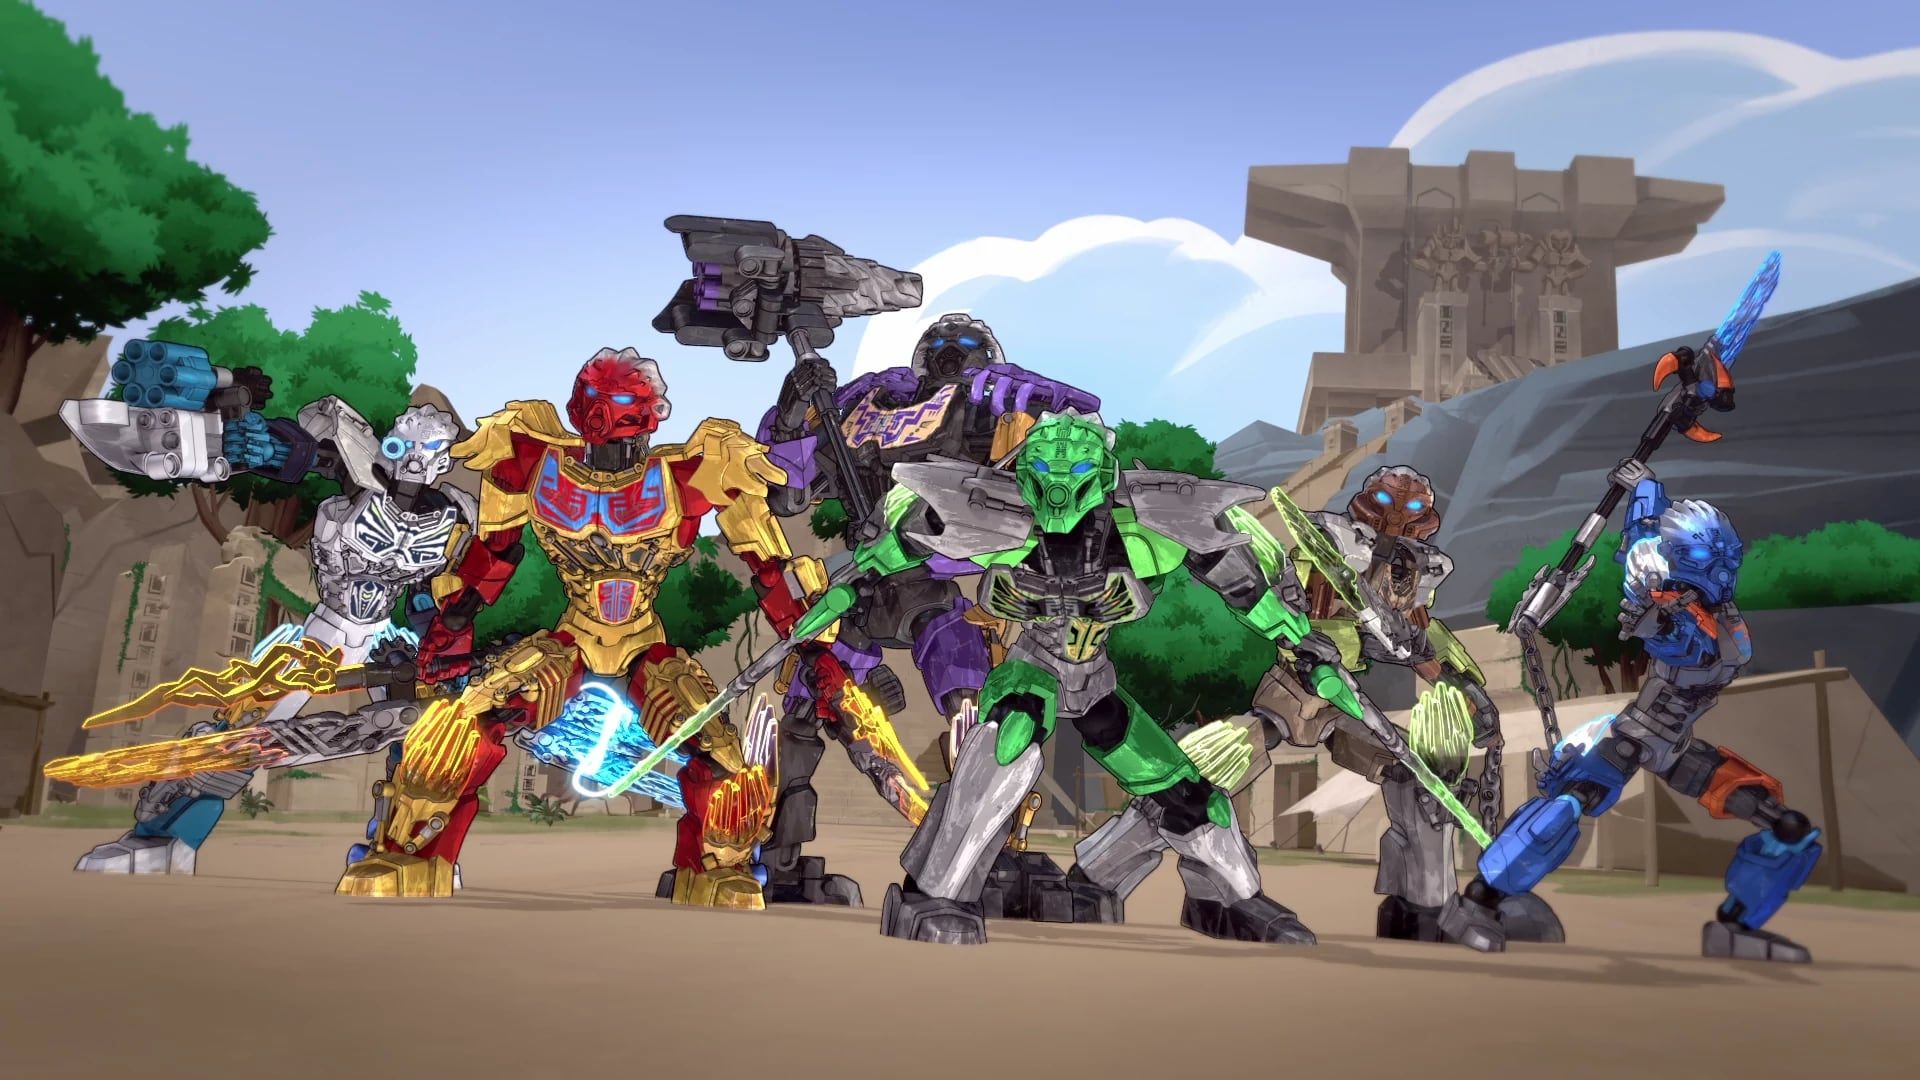 Lego Bionicle: The Journey to One background